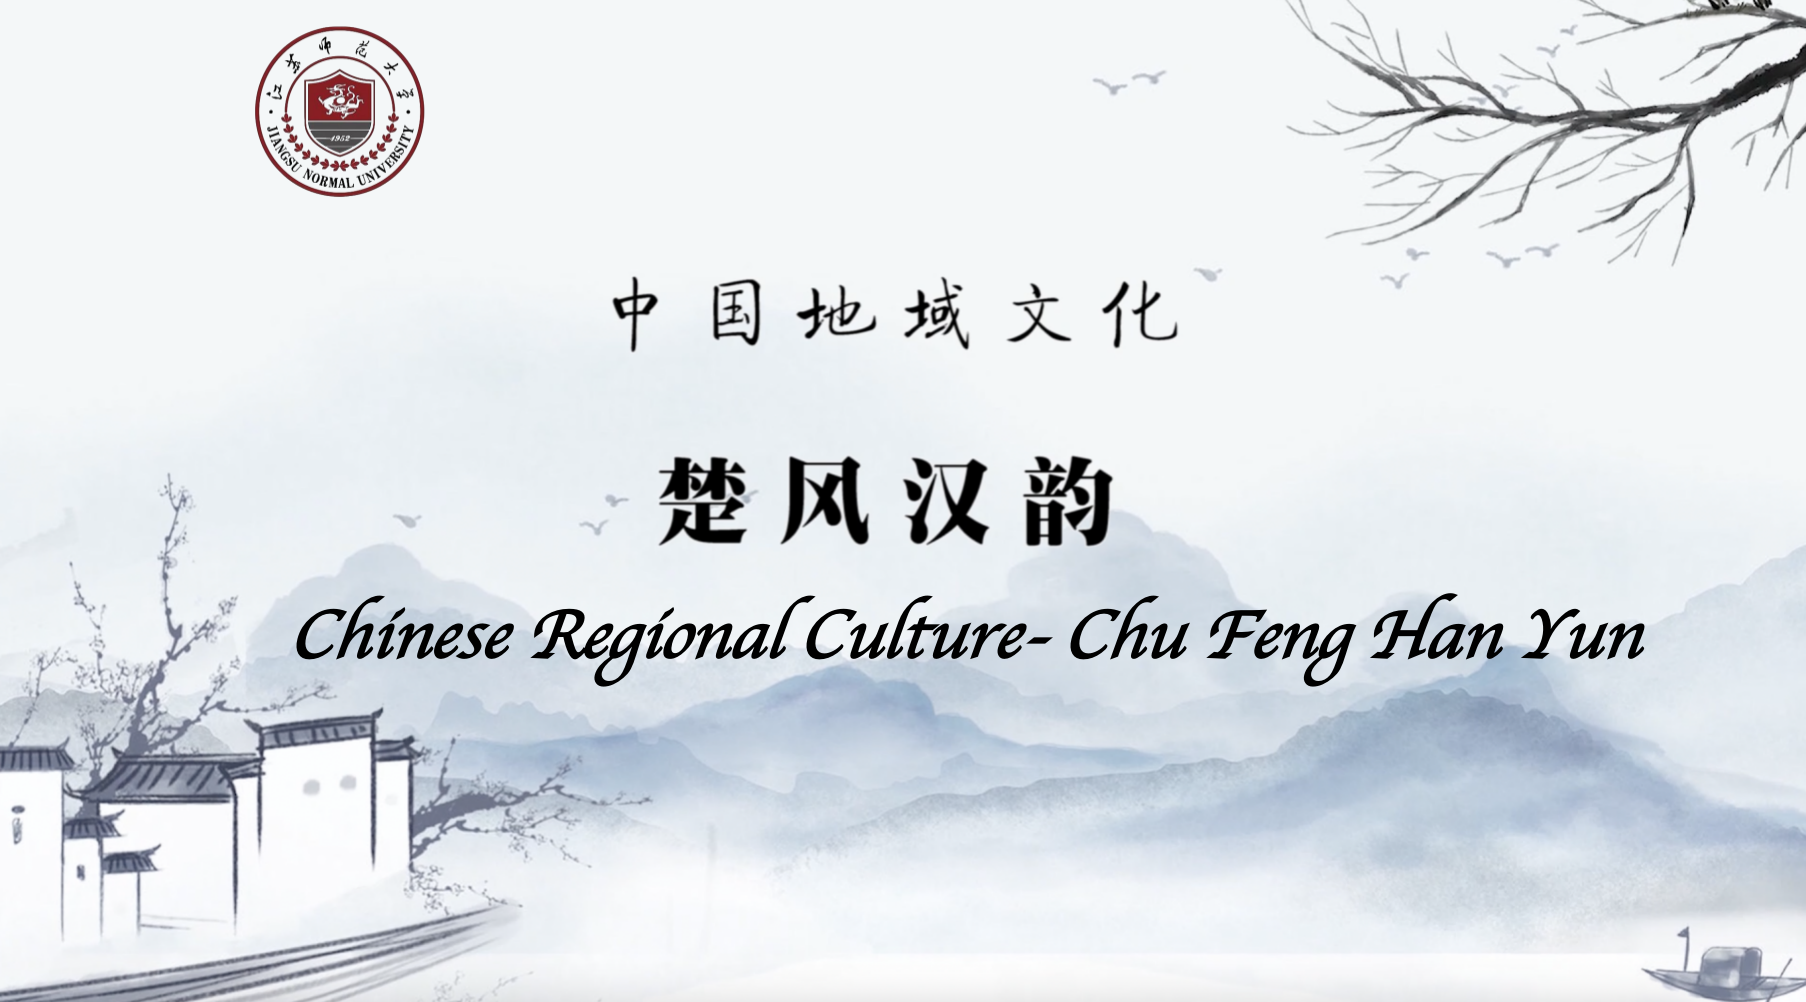 Chinese Regional Culture - History and Story in Chu and Han